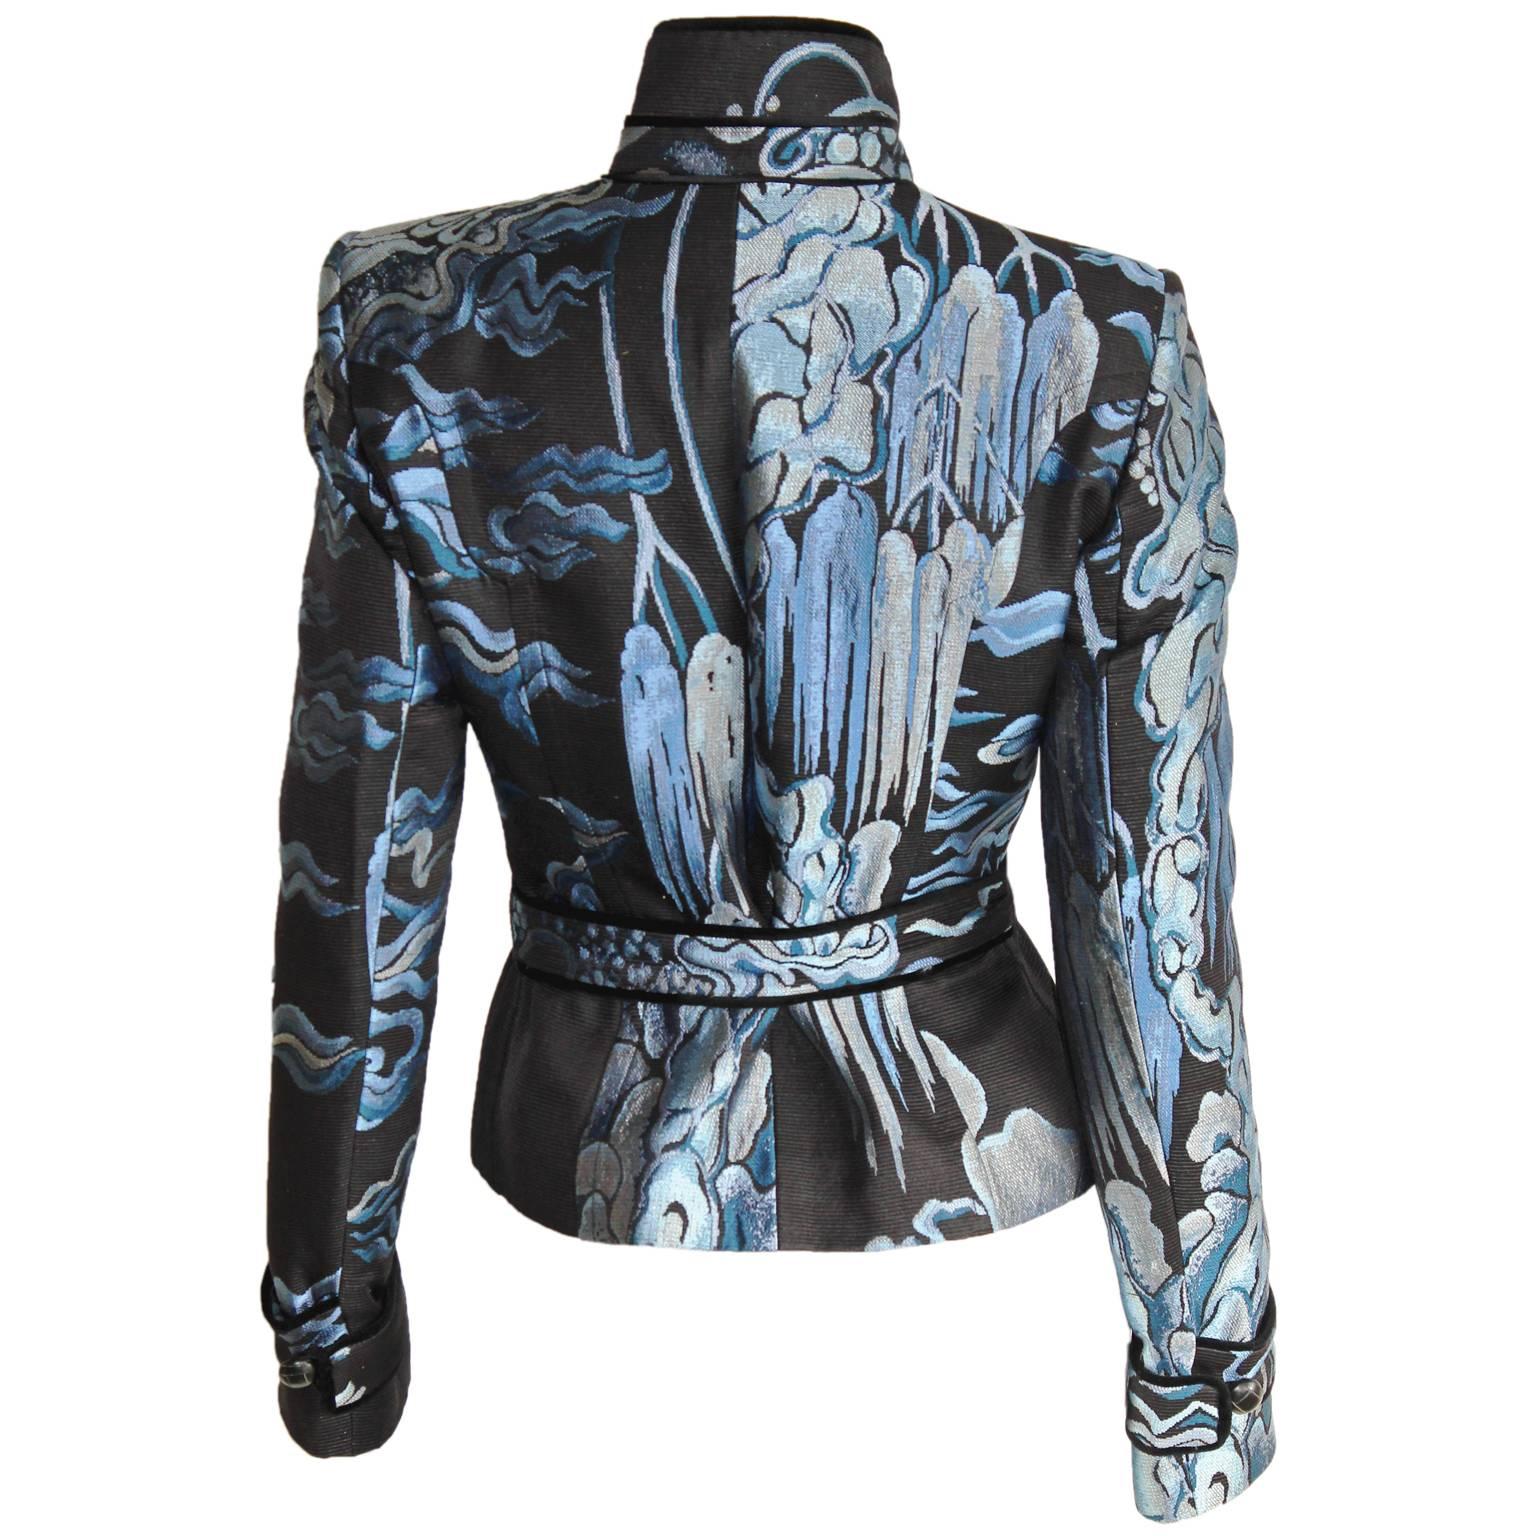 The Most Heavenly Tom Ford For YSL Yves Saint Laurent Rive Gauche Fall Winter 2004 Silk/Wool Blend Chinoiserie Jacket With Mink Trimmed Belt & Cuffs!

Who could ever forget Tom Ford's final show for Yves Saint Laurent, his exquisite YSL Rive